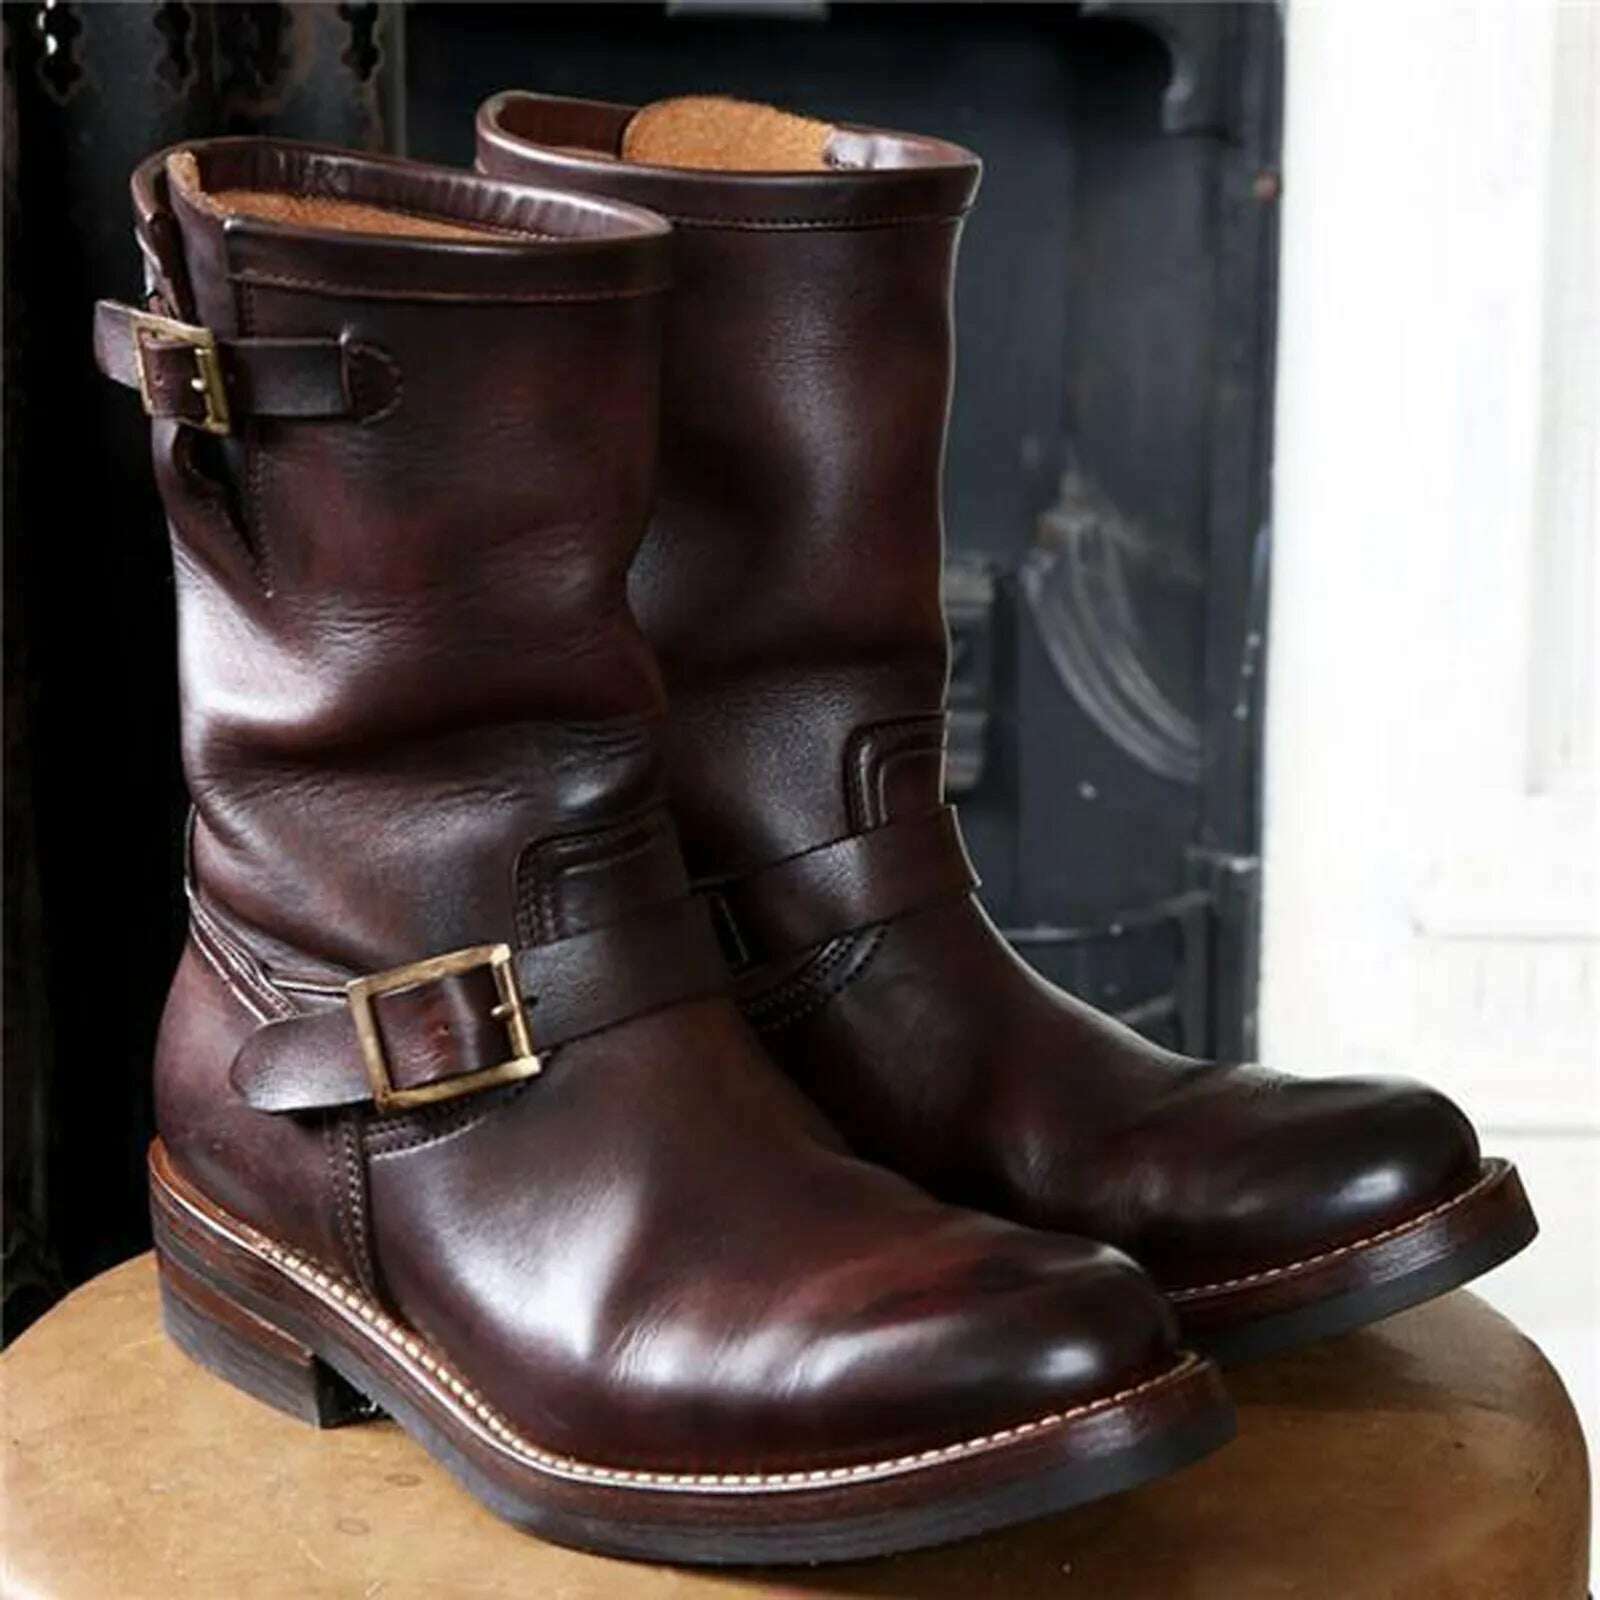 KIMLUD, Men's Vintage Cowboy Boots Leather High Top Chain Buckle Strap Punk Shoes Pointed Toe Biker Boots Men Botas Mujer, KIMLUD Women's Clothes